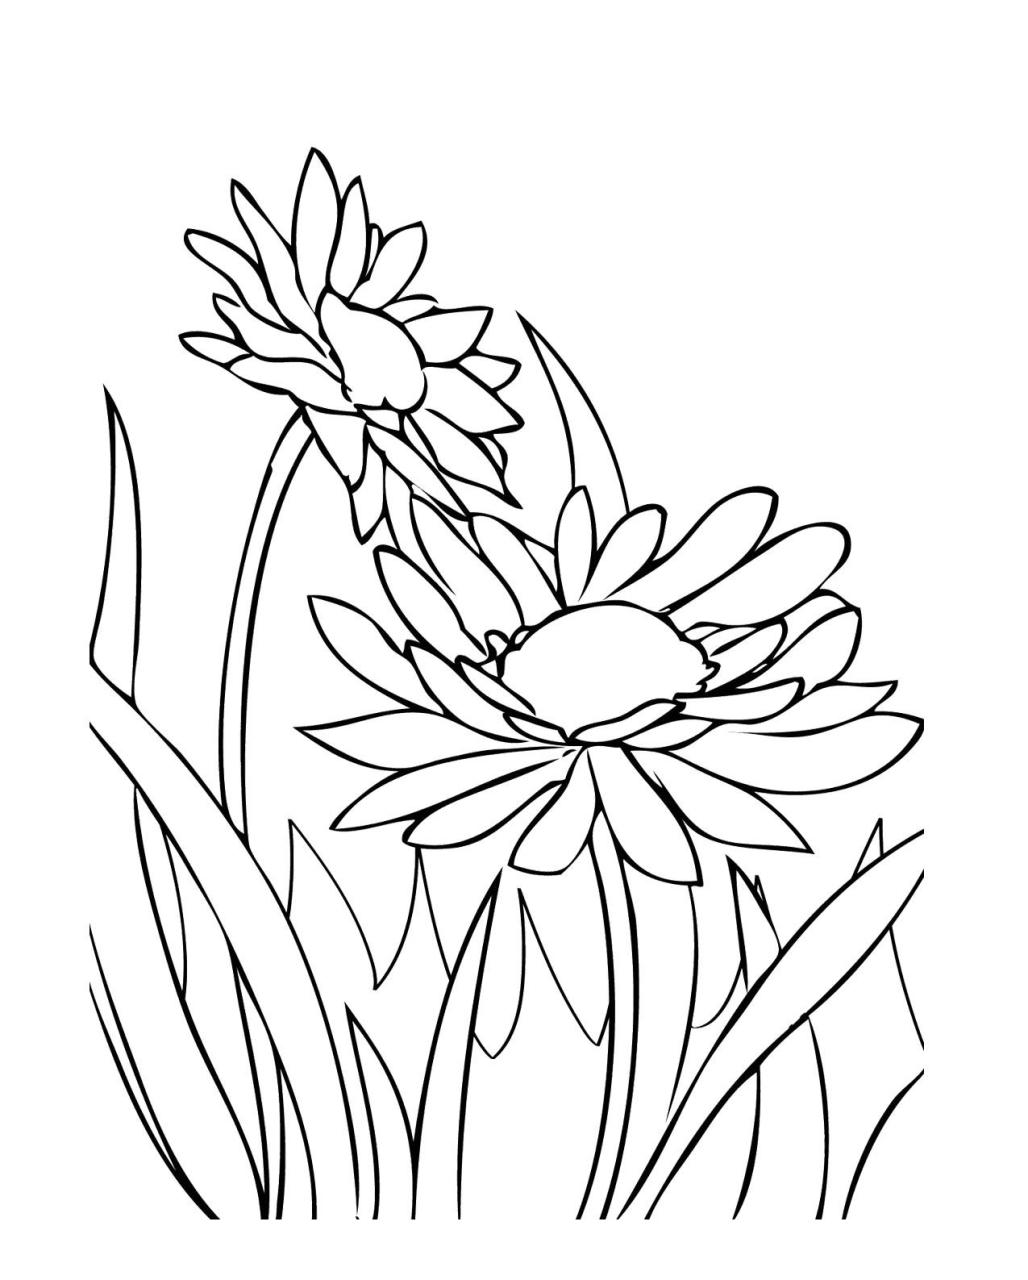 Growing Spring Flowers Coloring Pages Flower coloring pages, Flowers